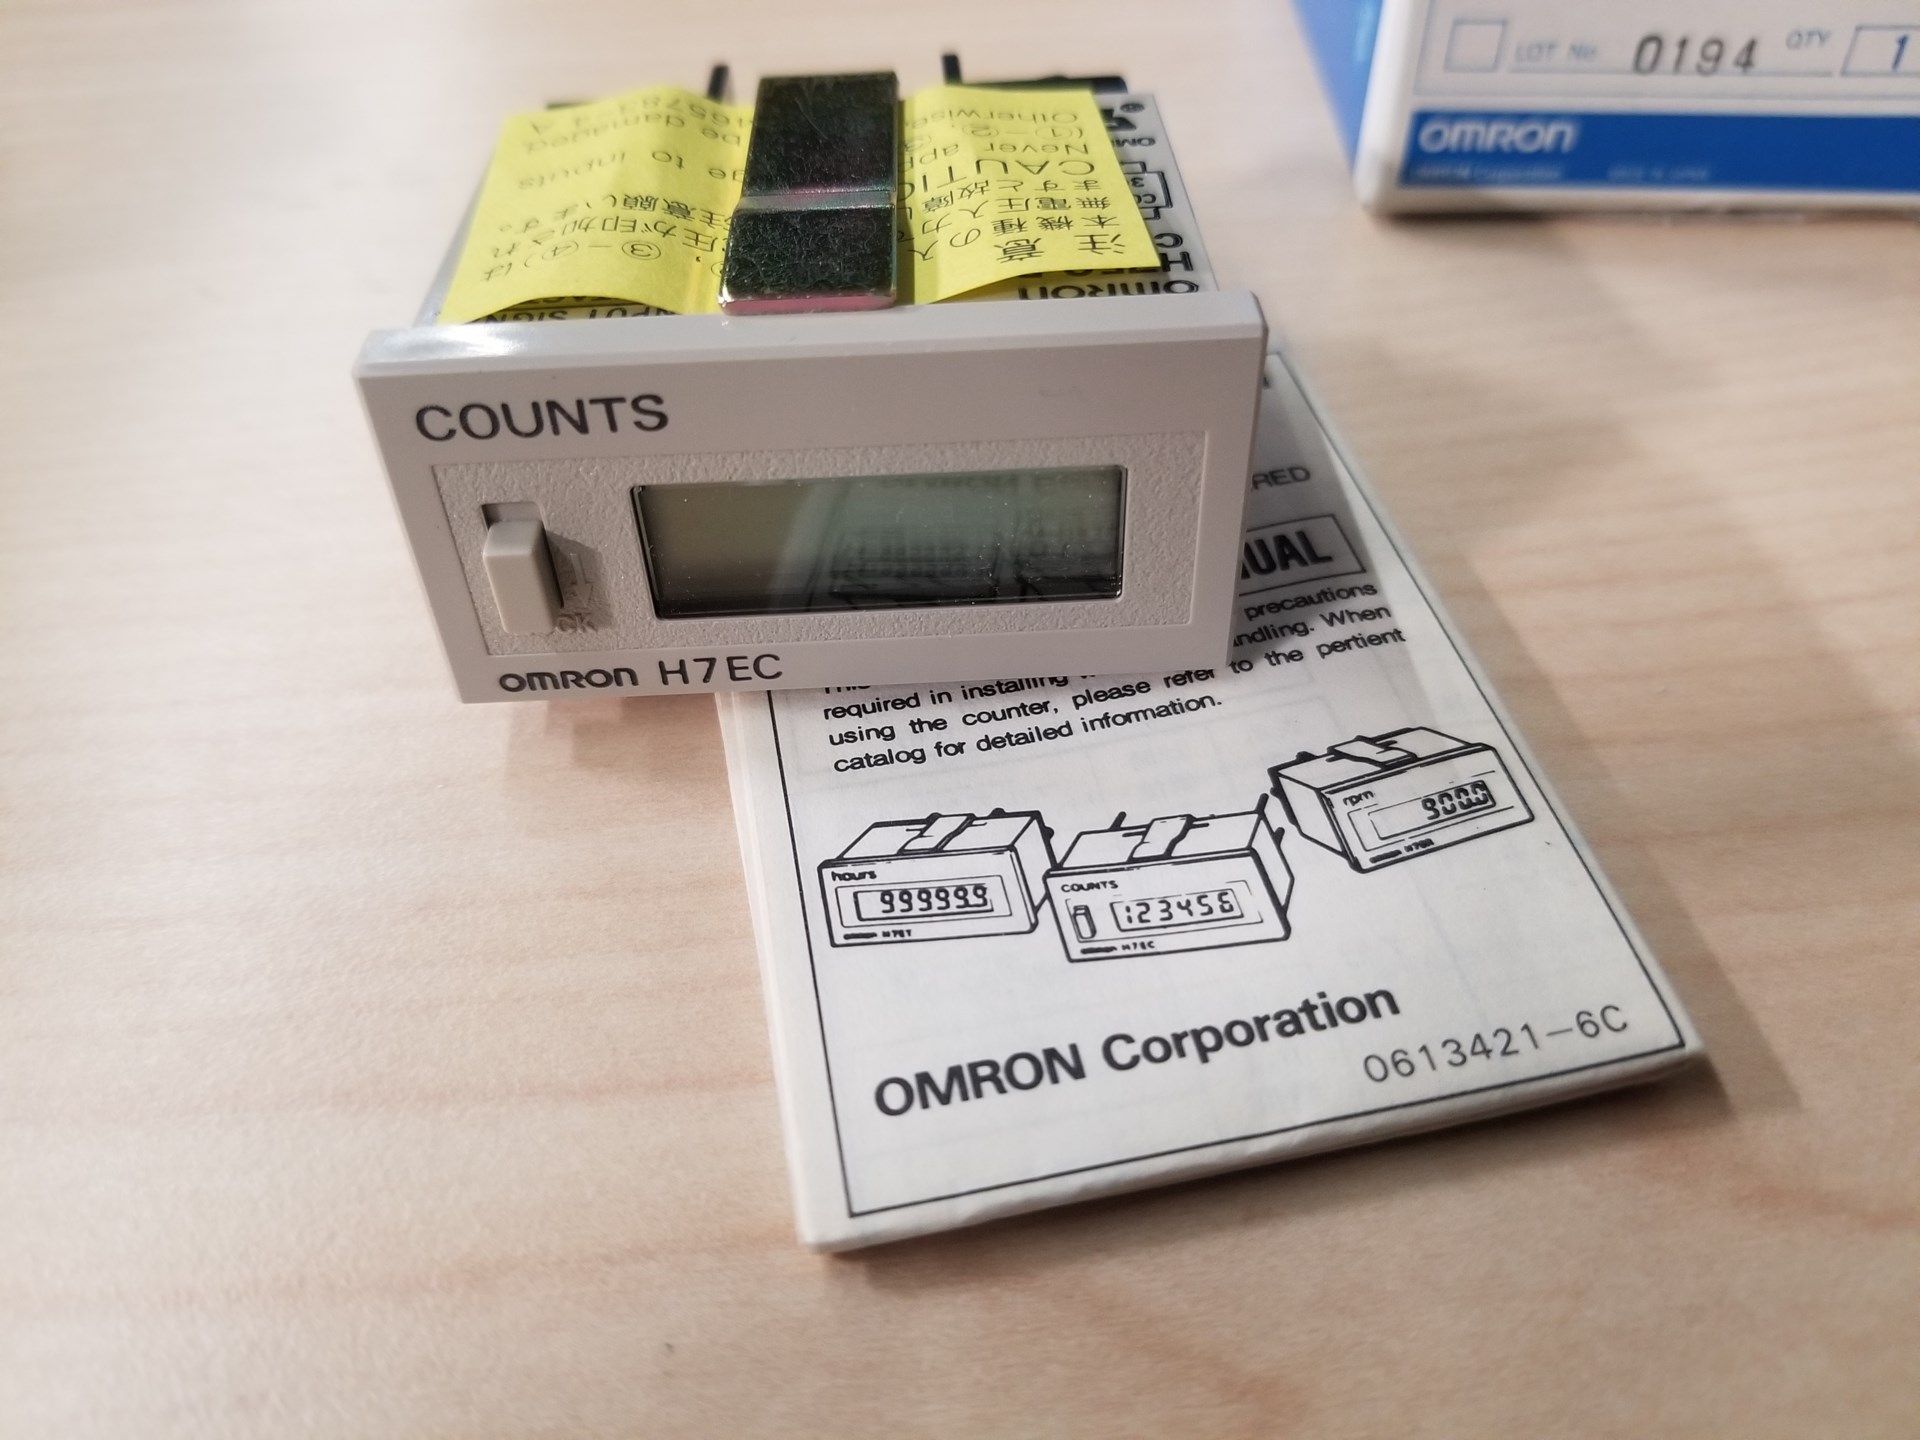 LOT OF 6 NEW OMRON H7EC-BLM TOTAL COUNTERS - Image 2 of 2